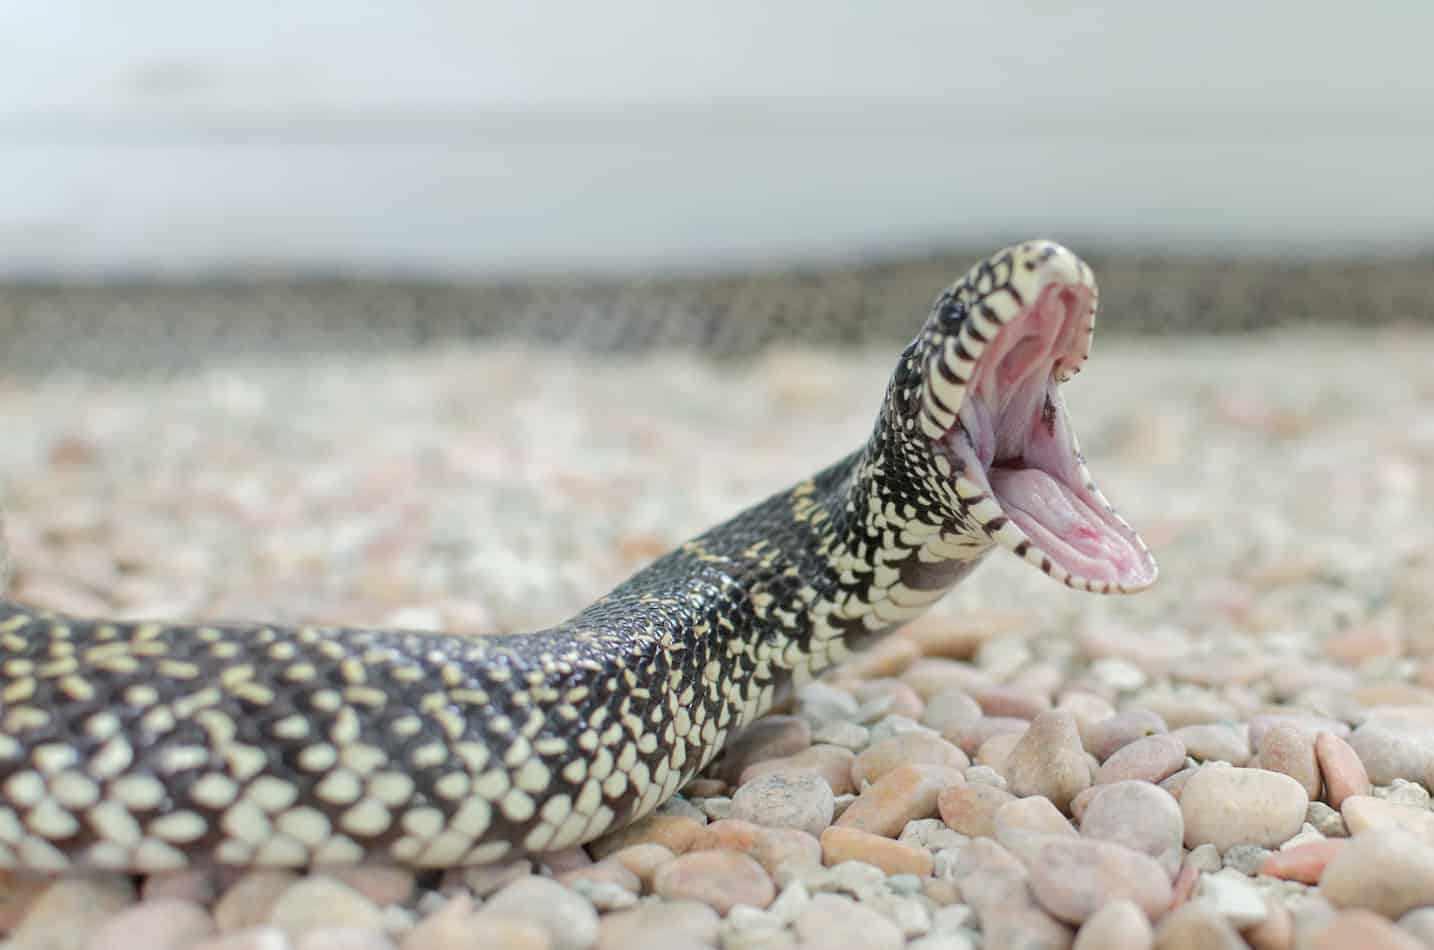 Are king snakes poisonous California King Snakes: Facts with Pictures and Video